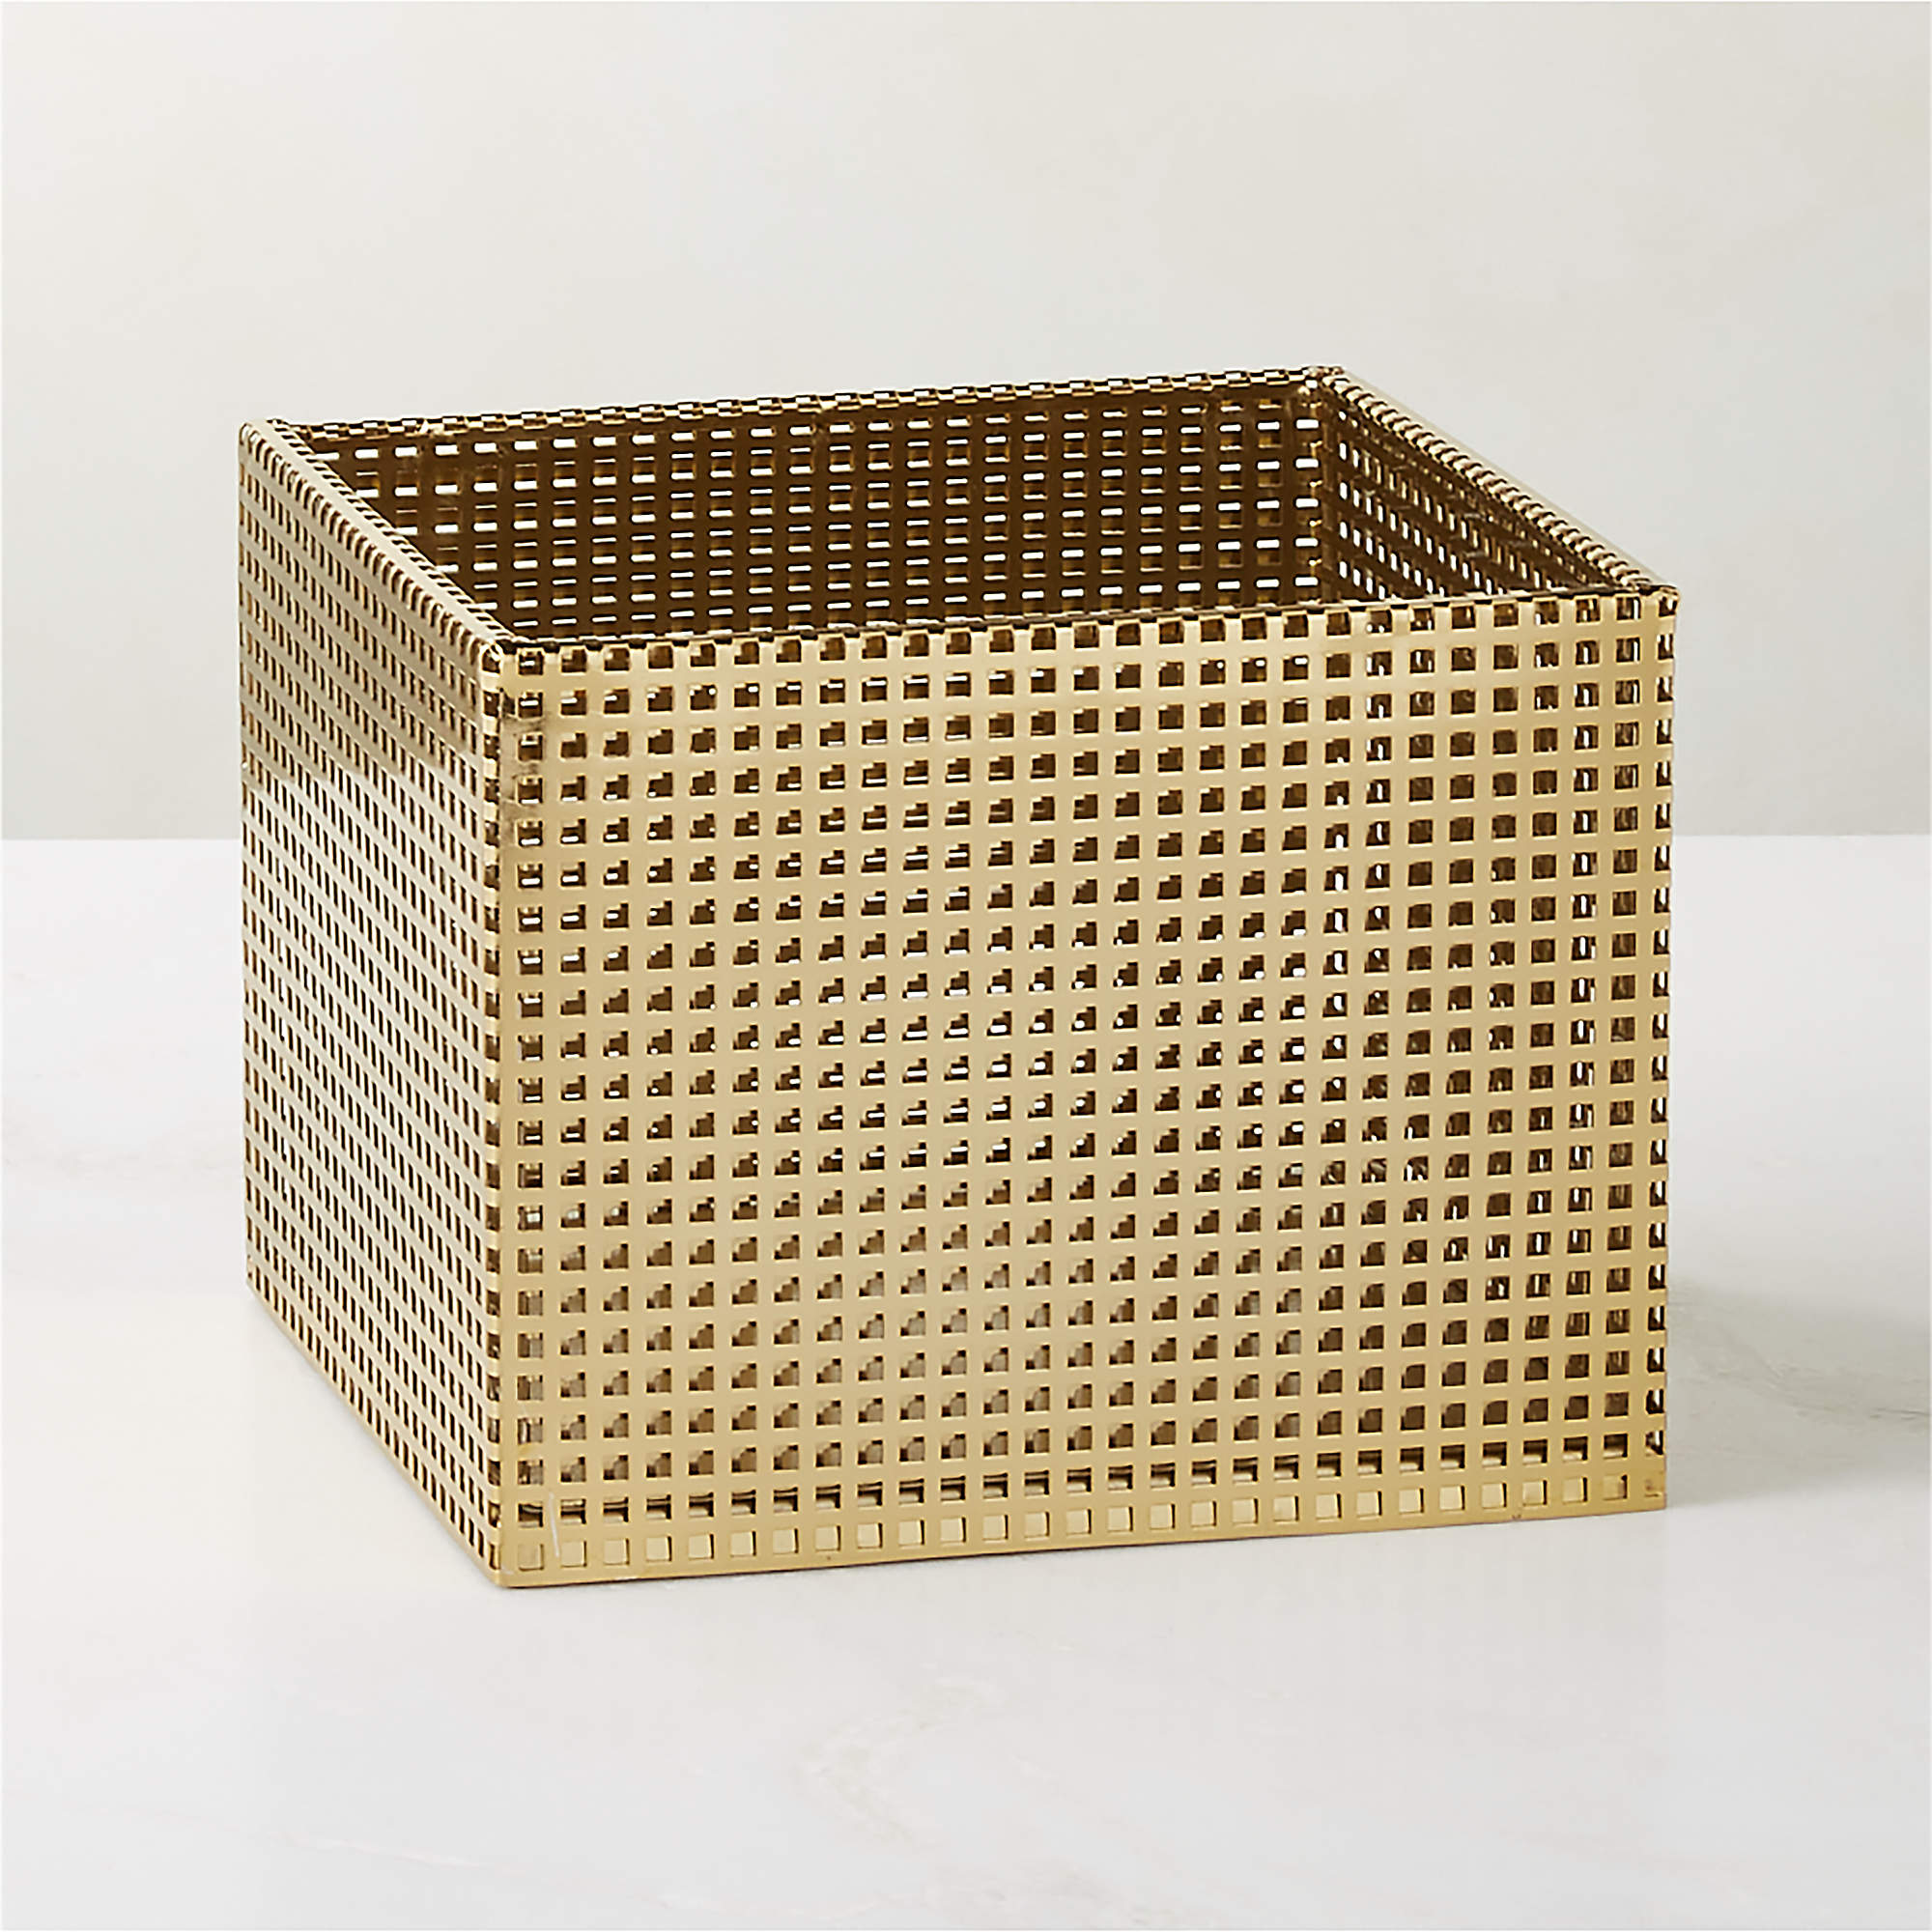 Shop TEGAN PERFORATED BRASS METAL STORAGE BASKET SMALL, Quantiti: 2 from CB2 on Openhaus